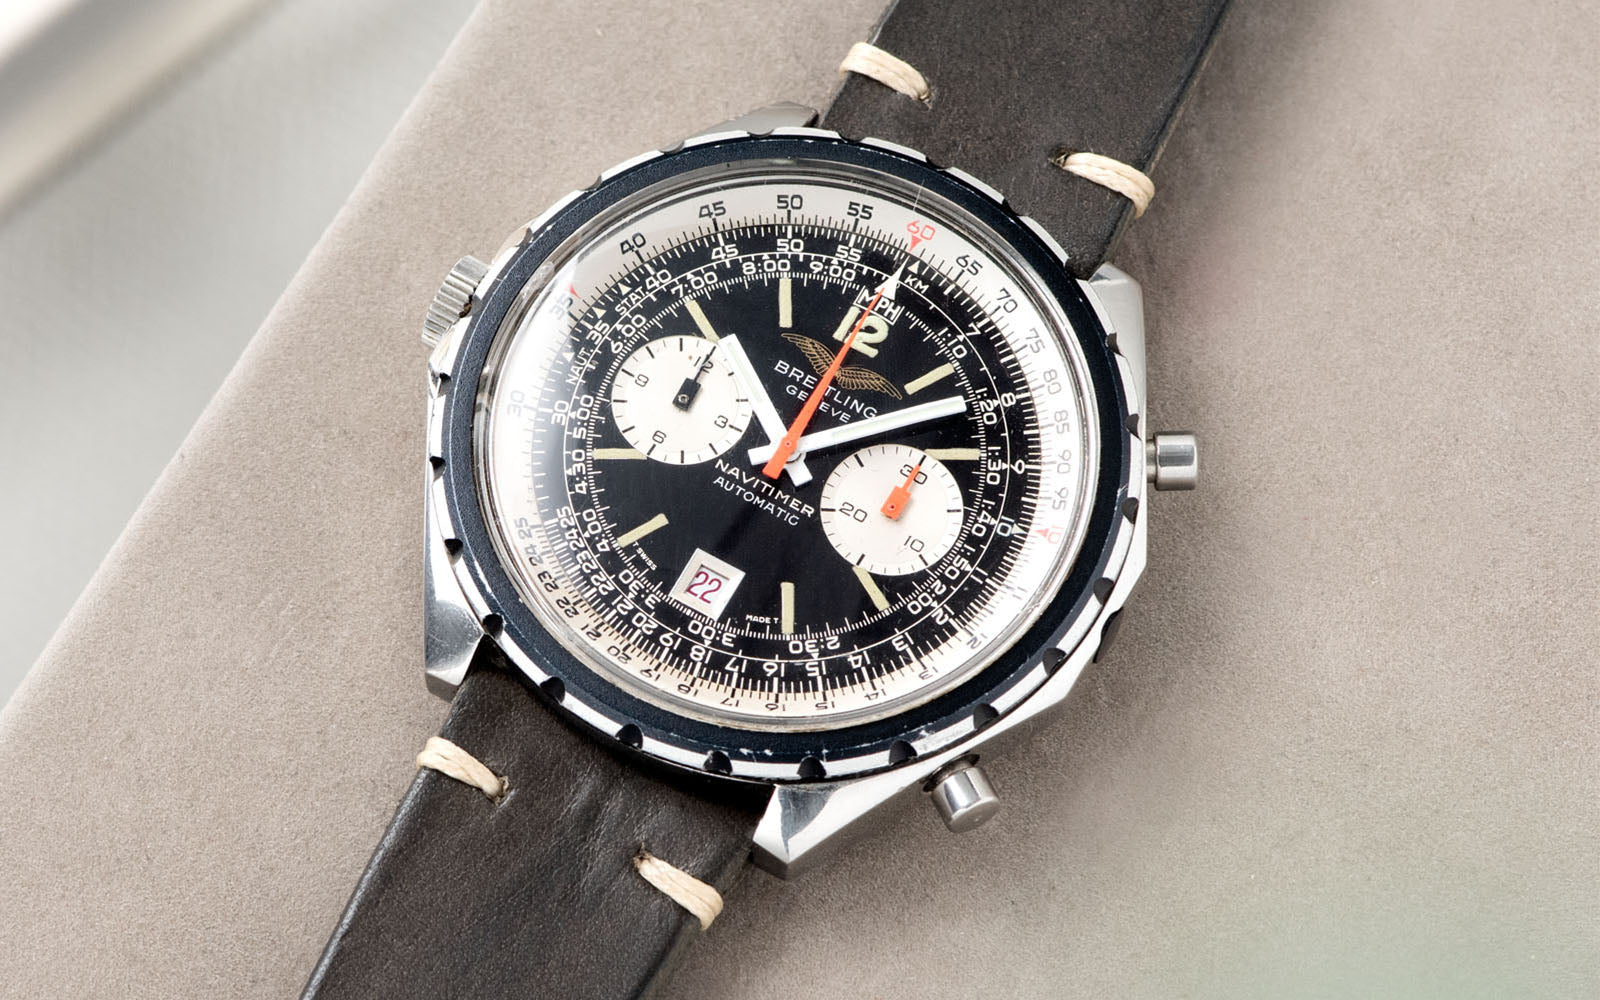 Bulang and Sons_Strap guide_Breitling Navitimer ref issued to iraqi air force ref 1806_Piombo Grey Leather Watch Strap_Banner